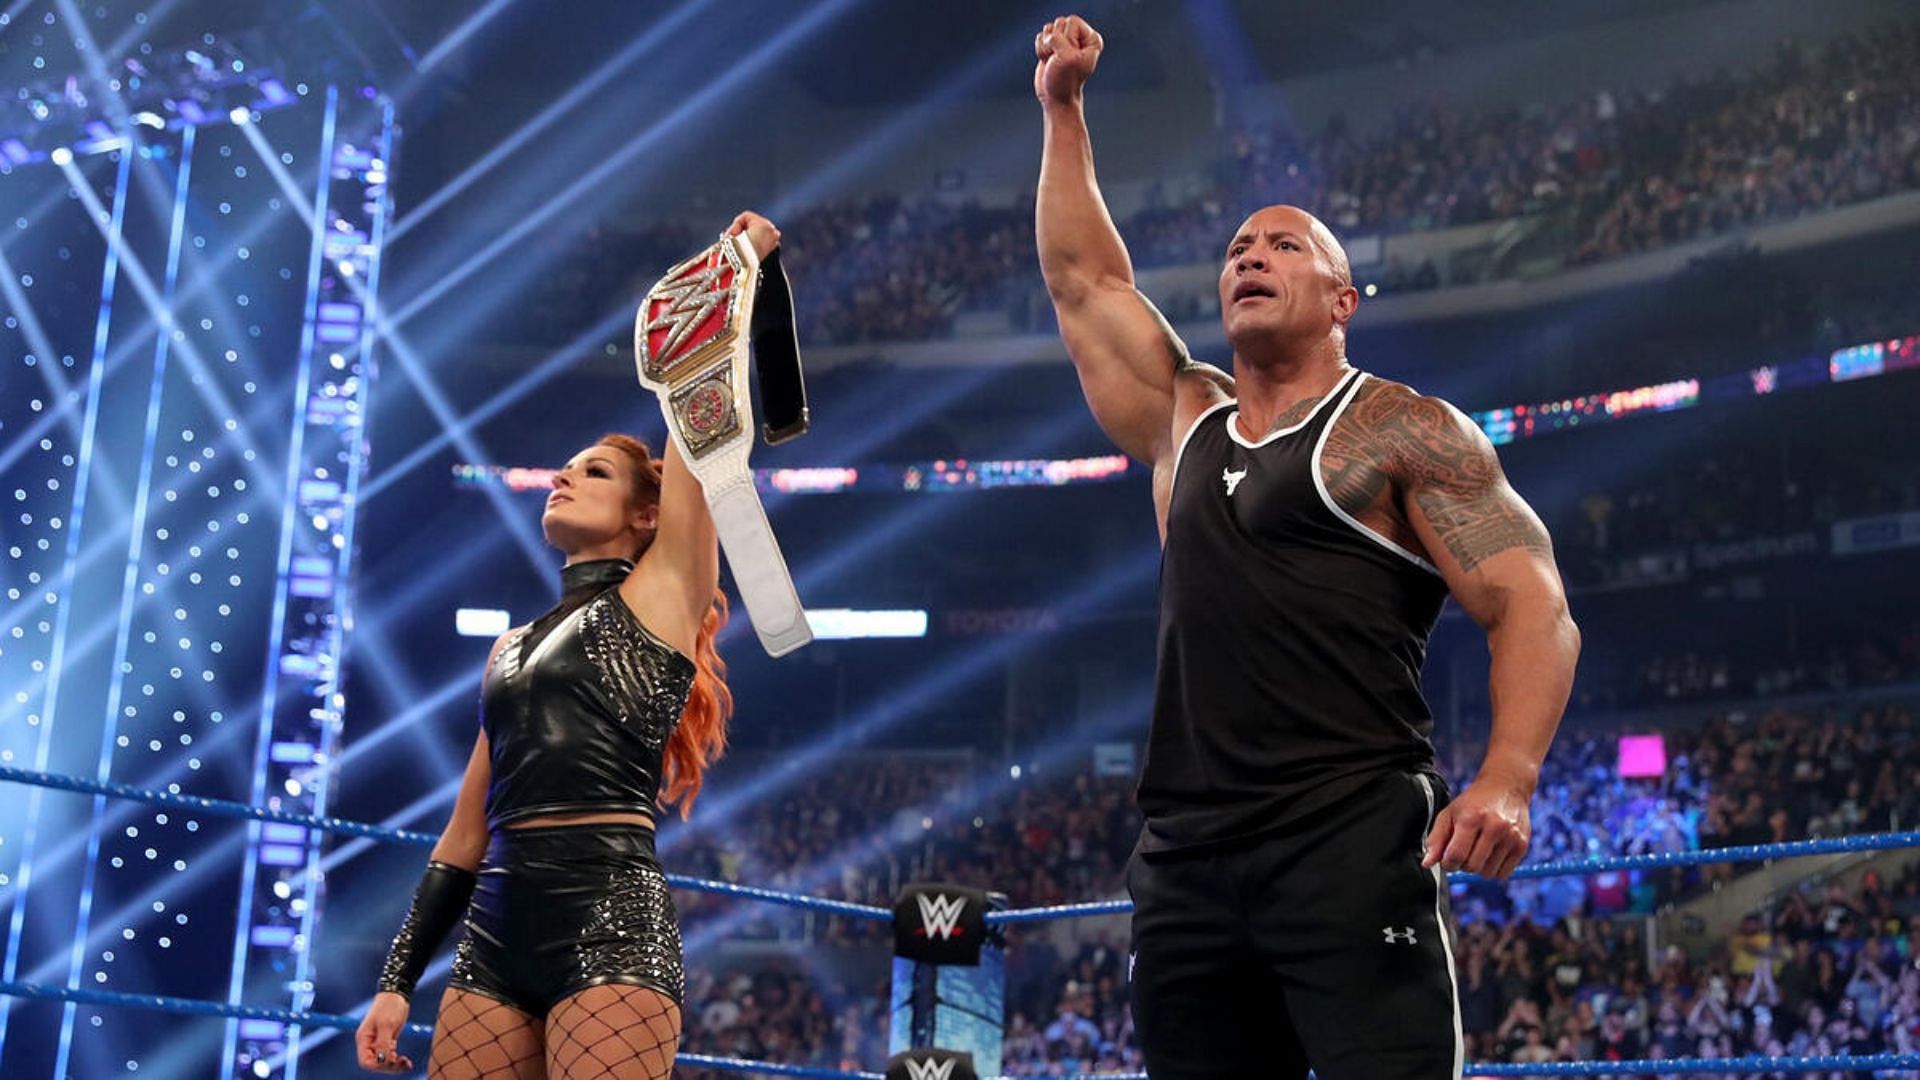 The Rock and Becky Lynch are great friends